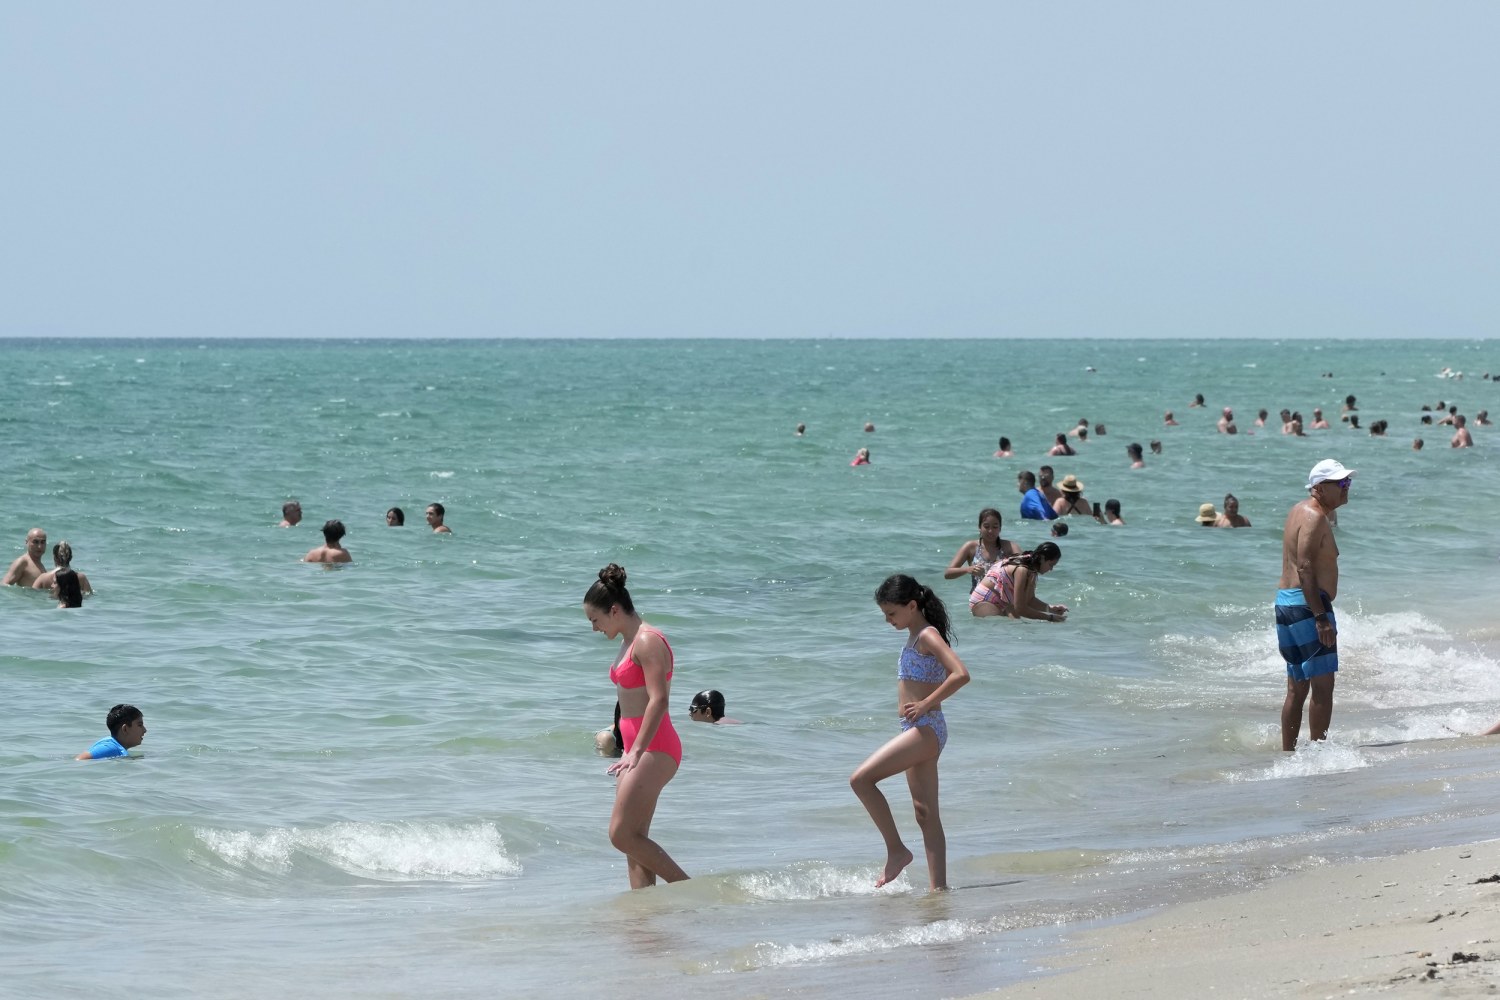 Like a hot tub: Water temperatures off Florida soar over 100